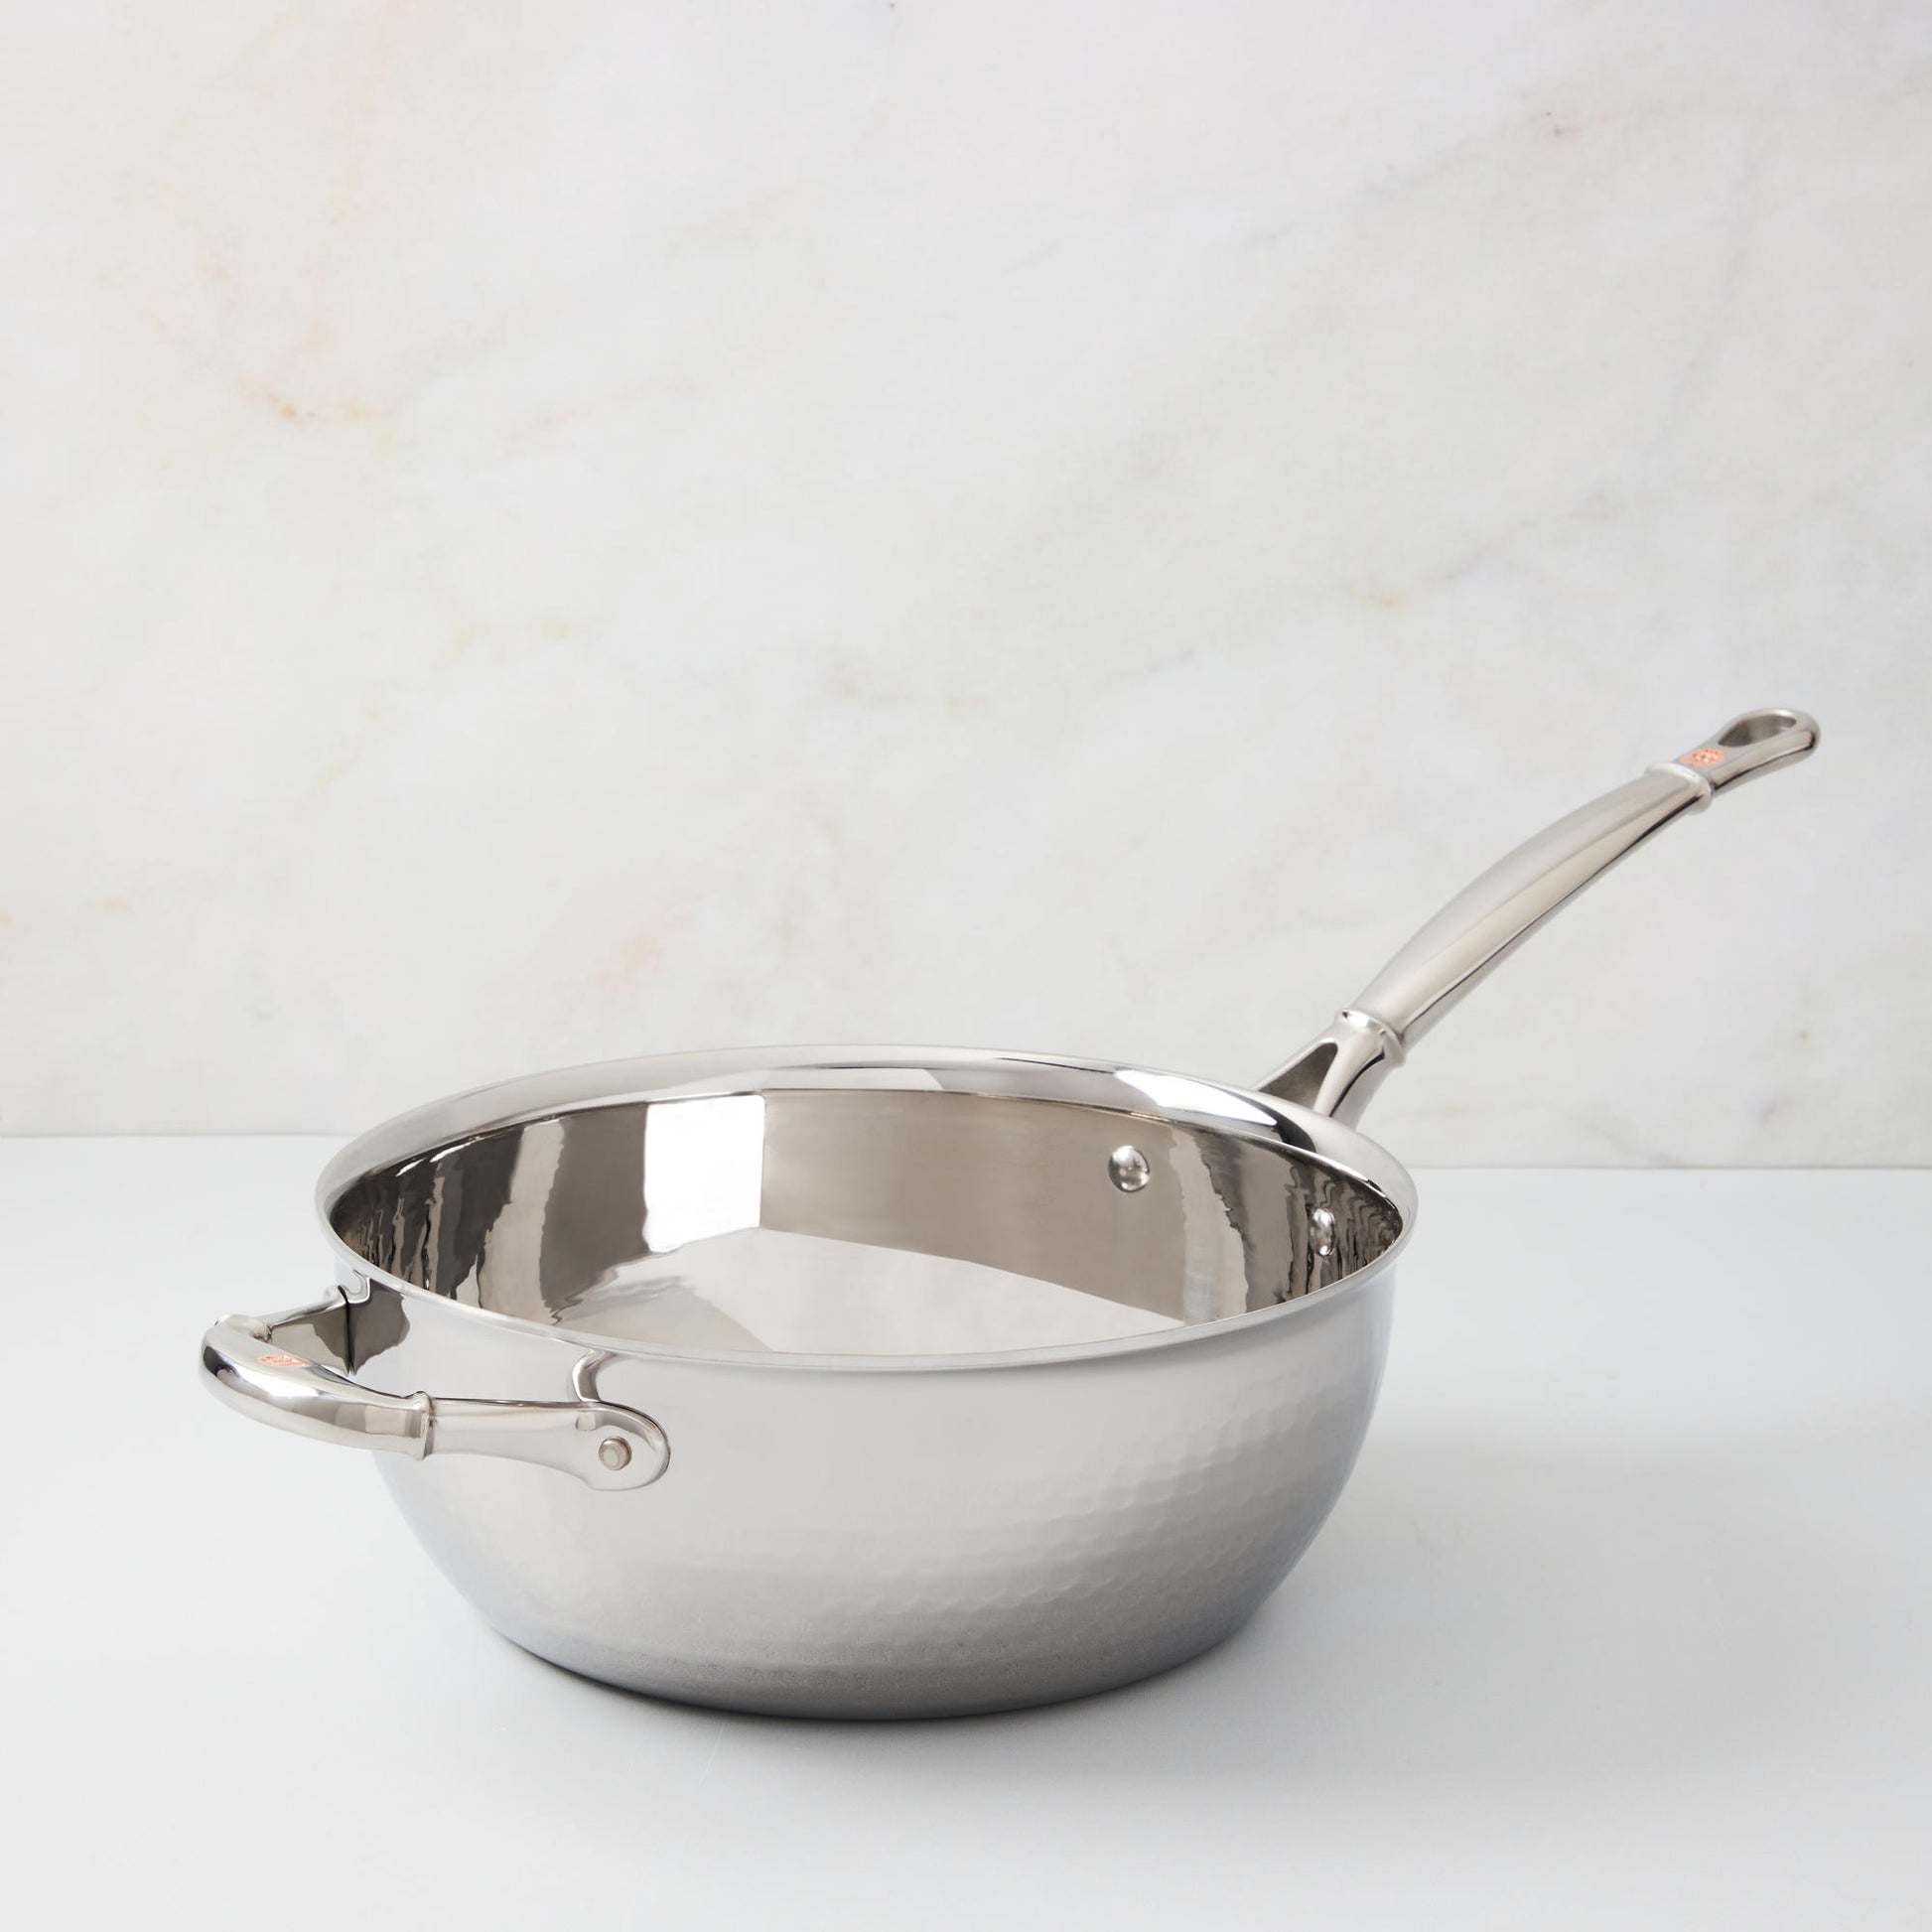 Hammered clad stainless steel  chef's pan with lid from Ruffoni